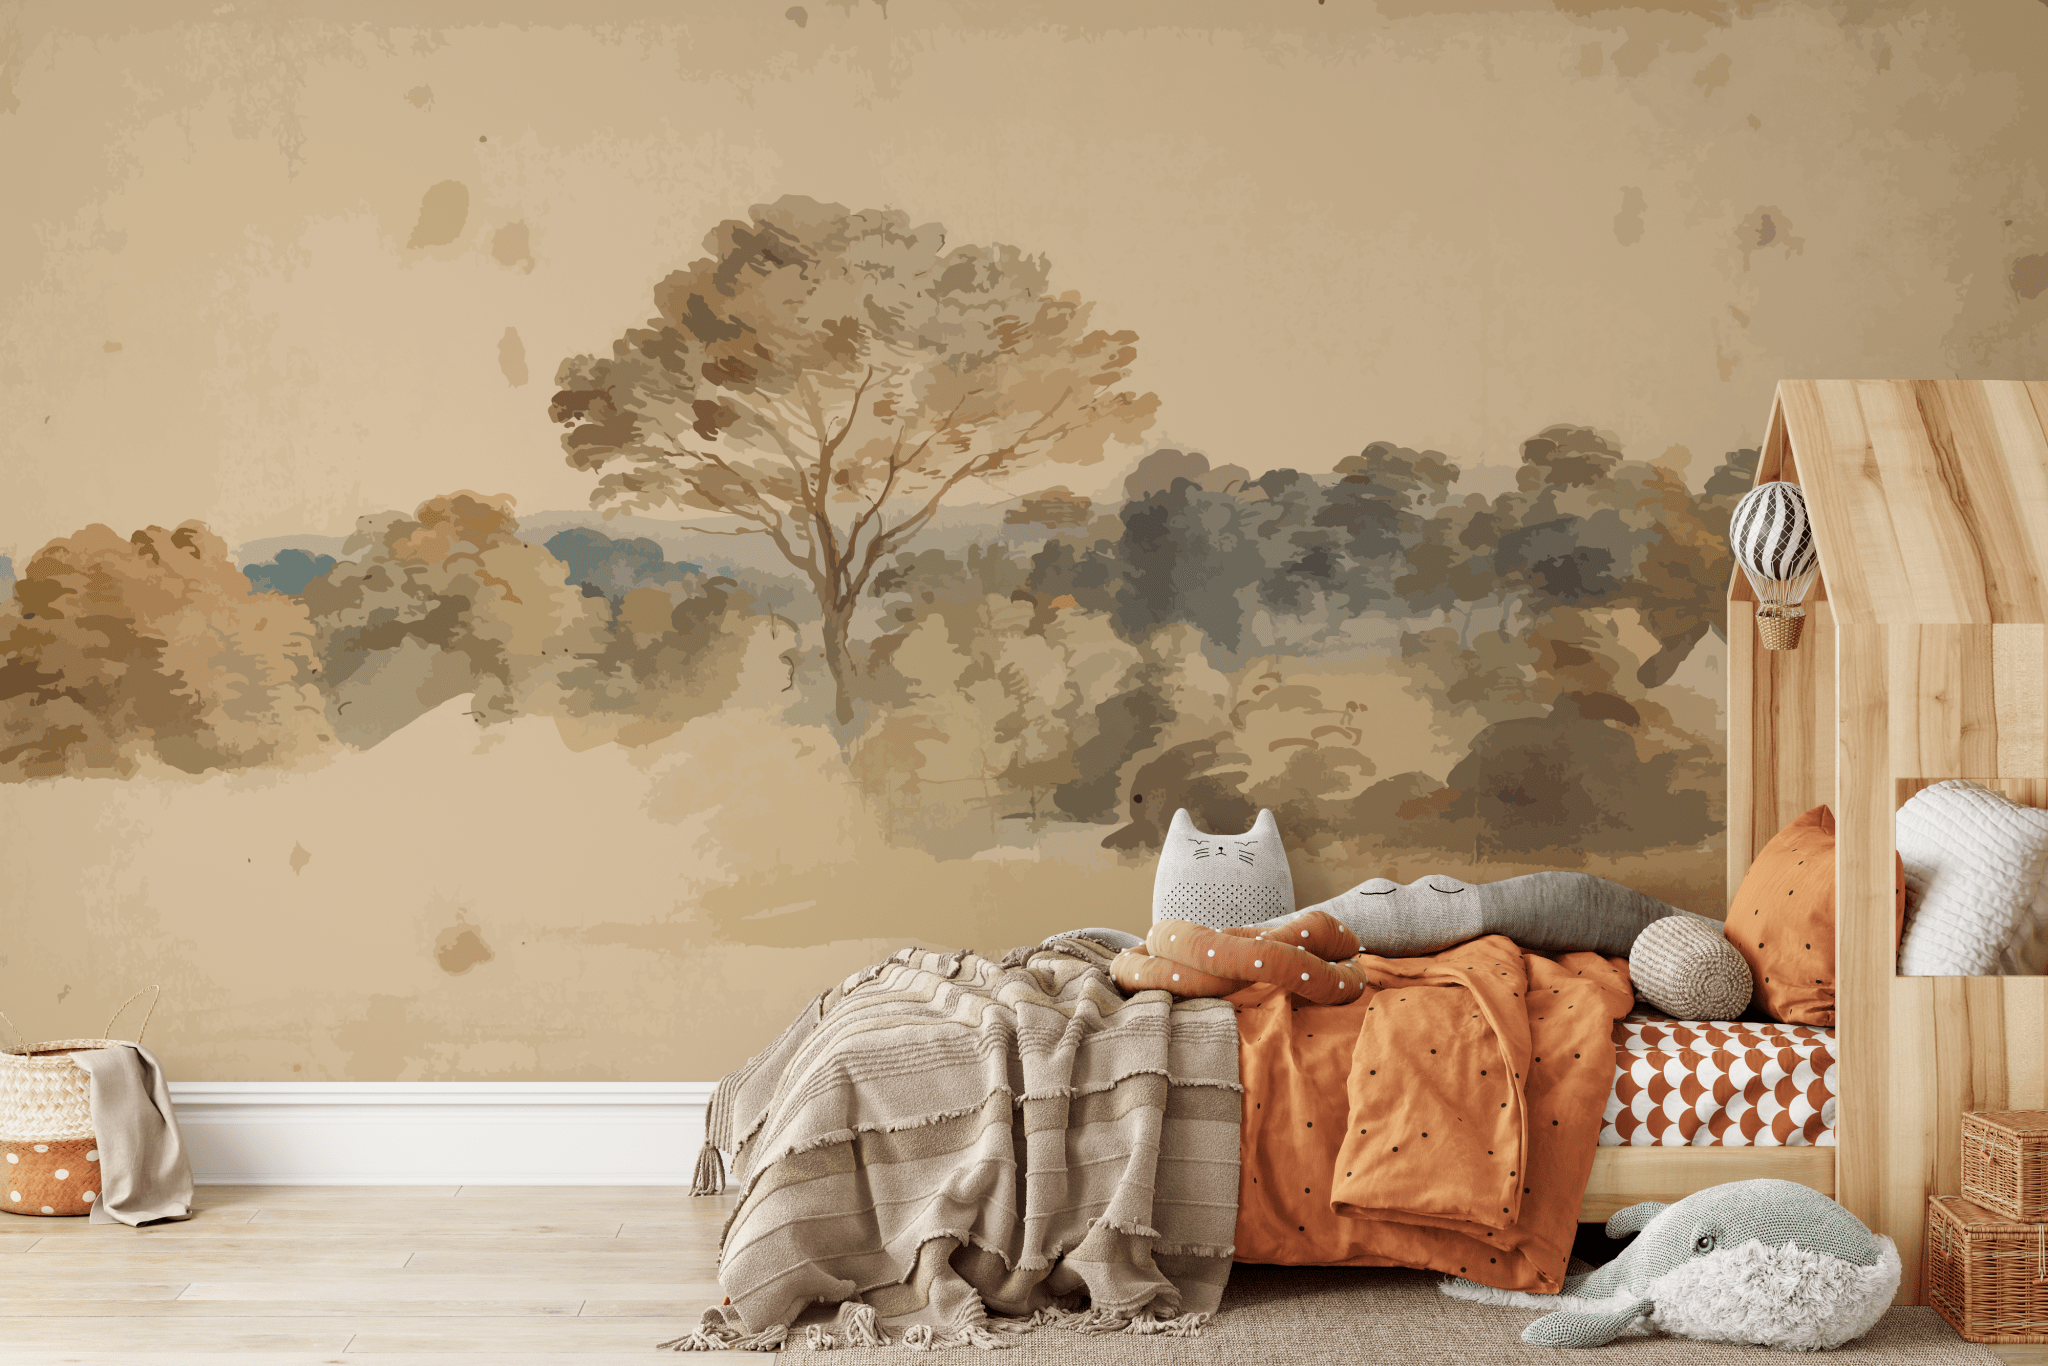 A cozy children's room corner with a peel and stick wall mural depicting a vintage, impressionistic landscape with a large tree. The room is decorated with a plush cat pillow, a wooden bed frame with a knitted blanket, and a woven basket.